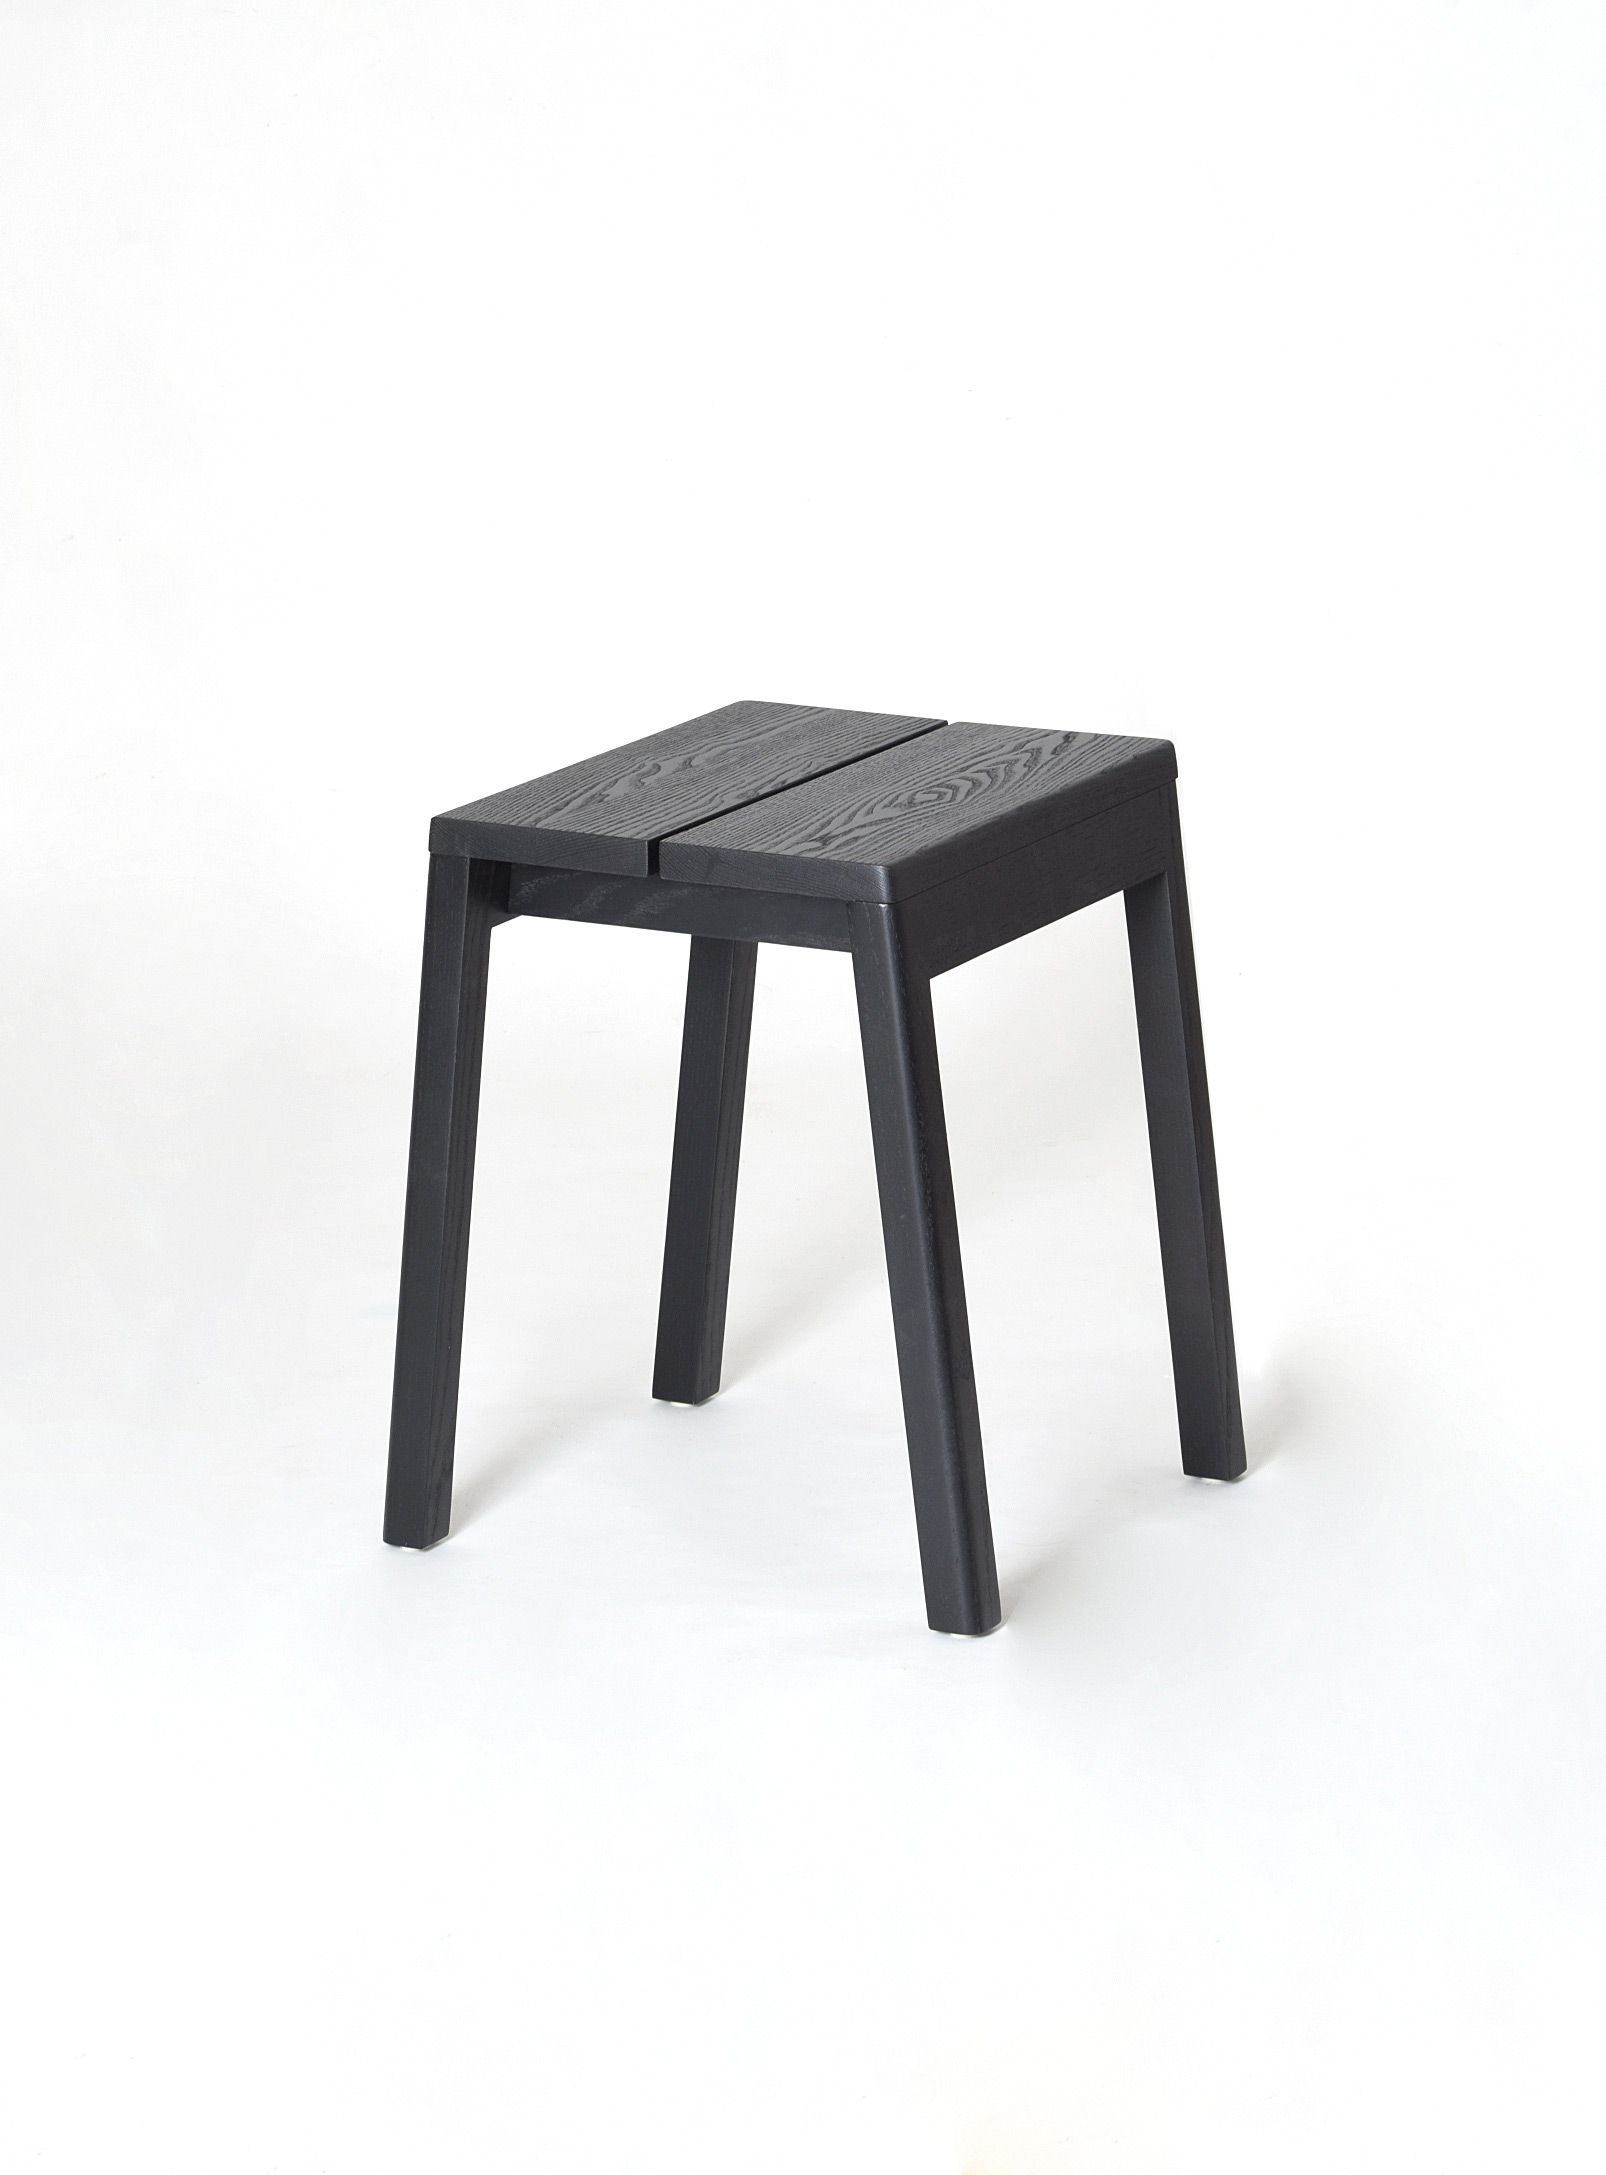 Essai Mobilier Same, Same Wooden Stool In Black